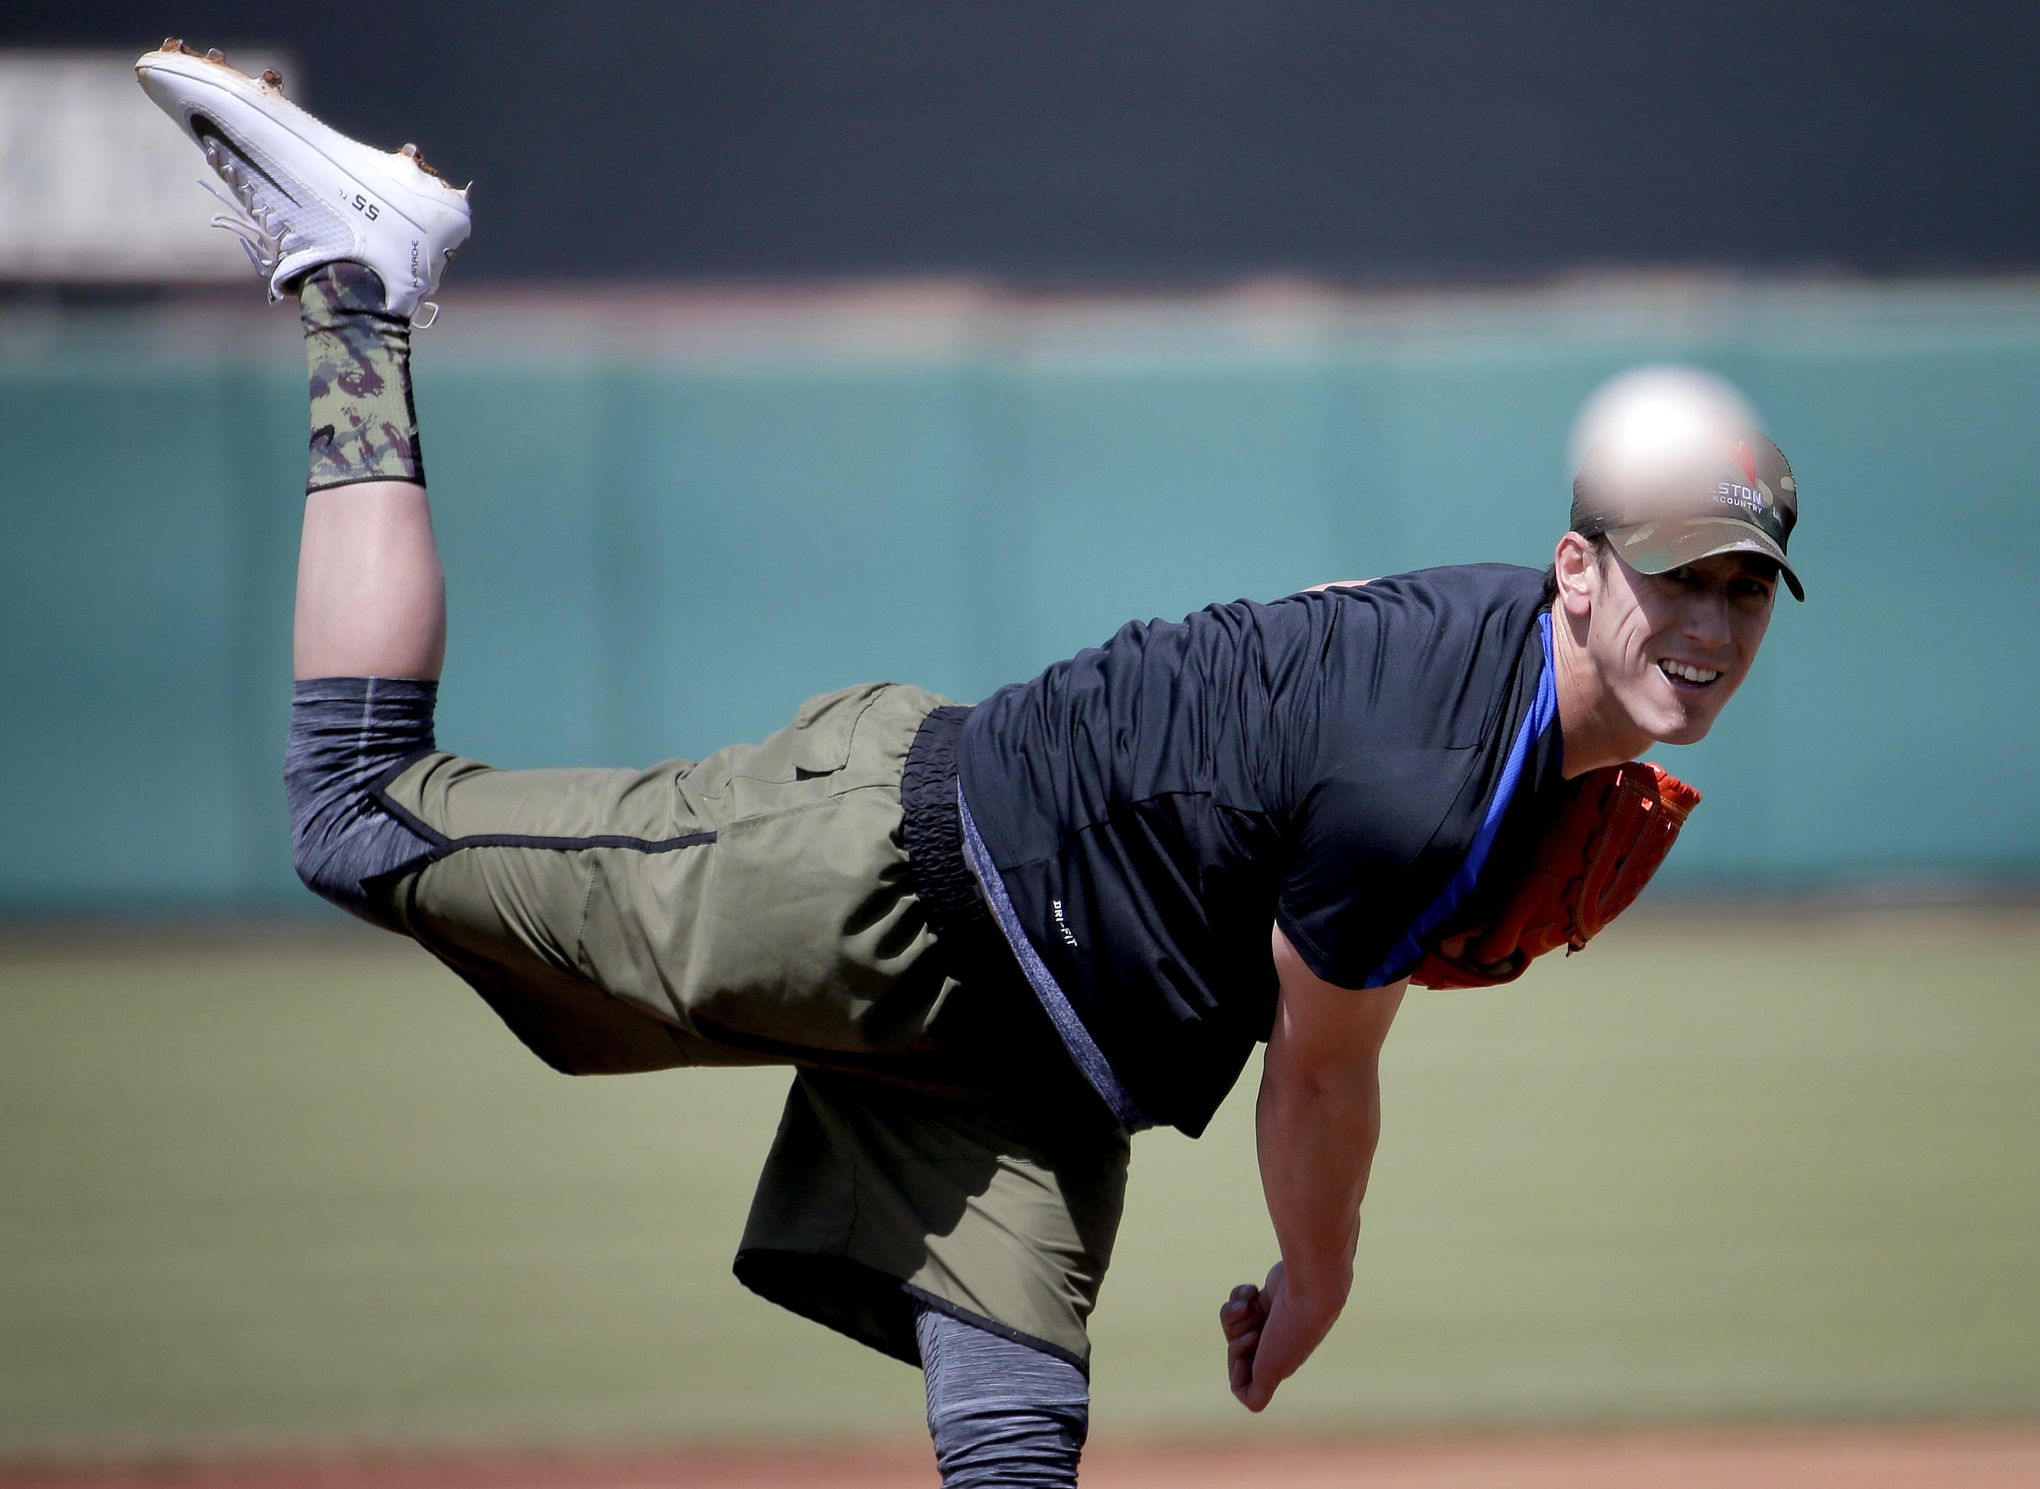 Take 2: Tim Lincecum would have been a great fit with Mariners